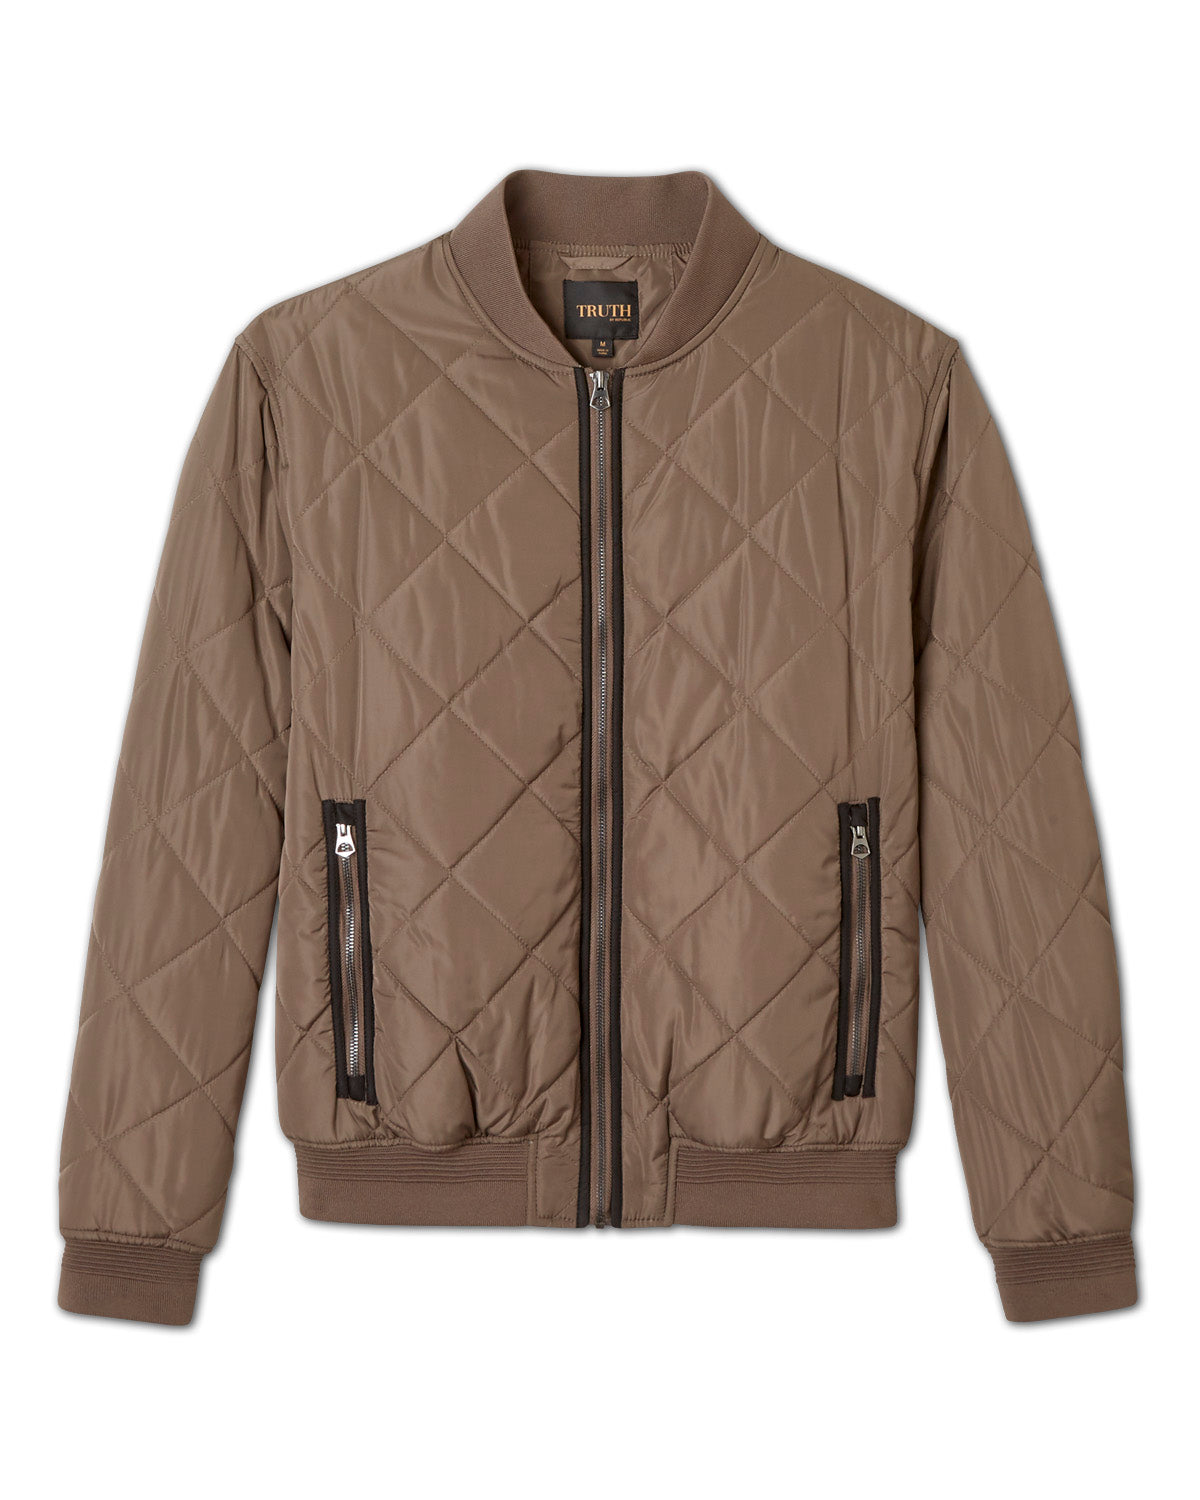 Quilted bomber jacket in sand suede